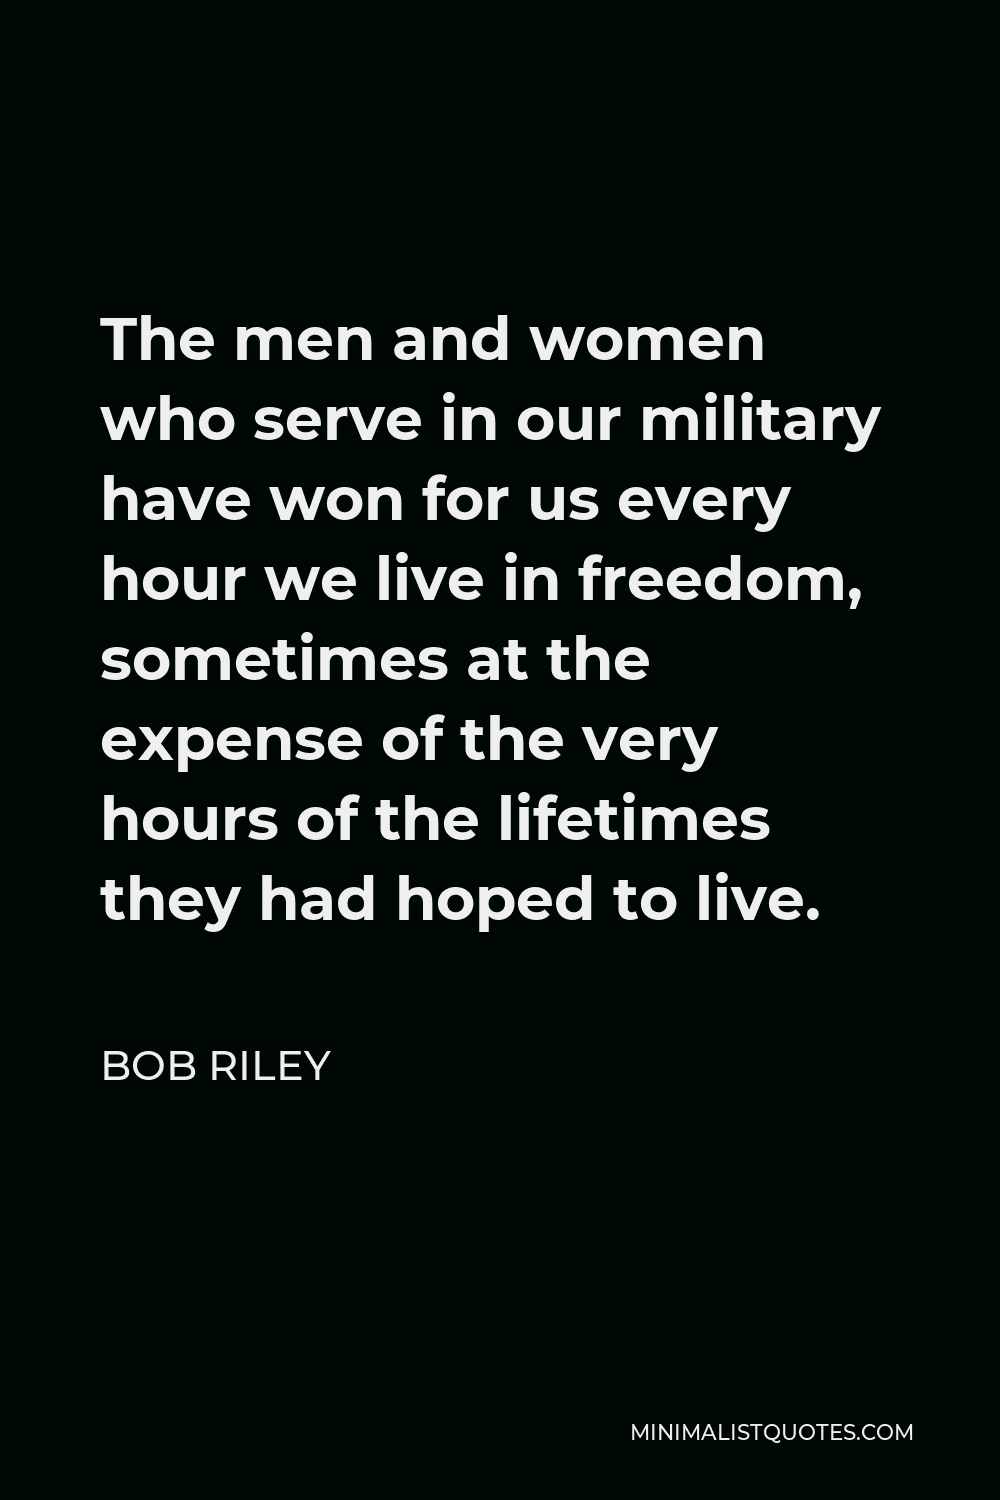 Bob Riley Quote - The men and women who serve in our military have won for us every hour we live in freedom, sometimes at the expense of the very hours of the lifetimes they had hoped to live.